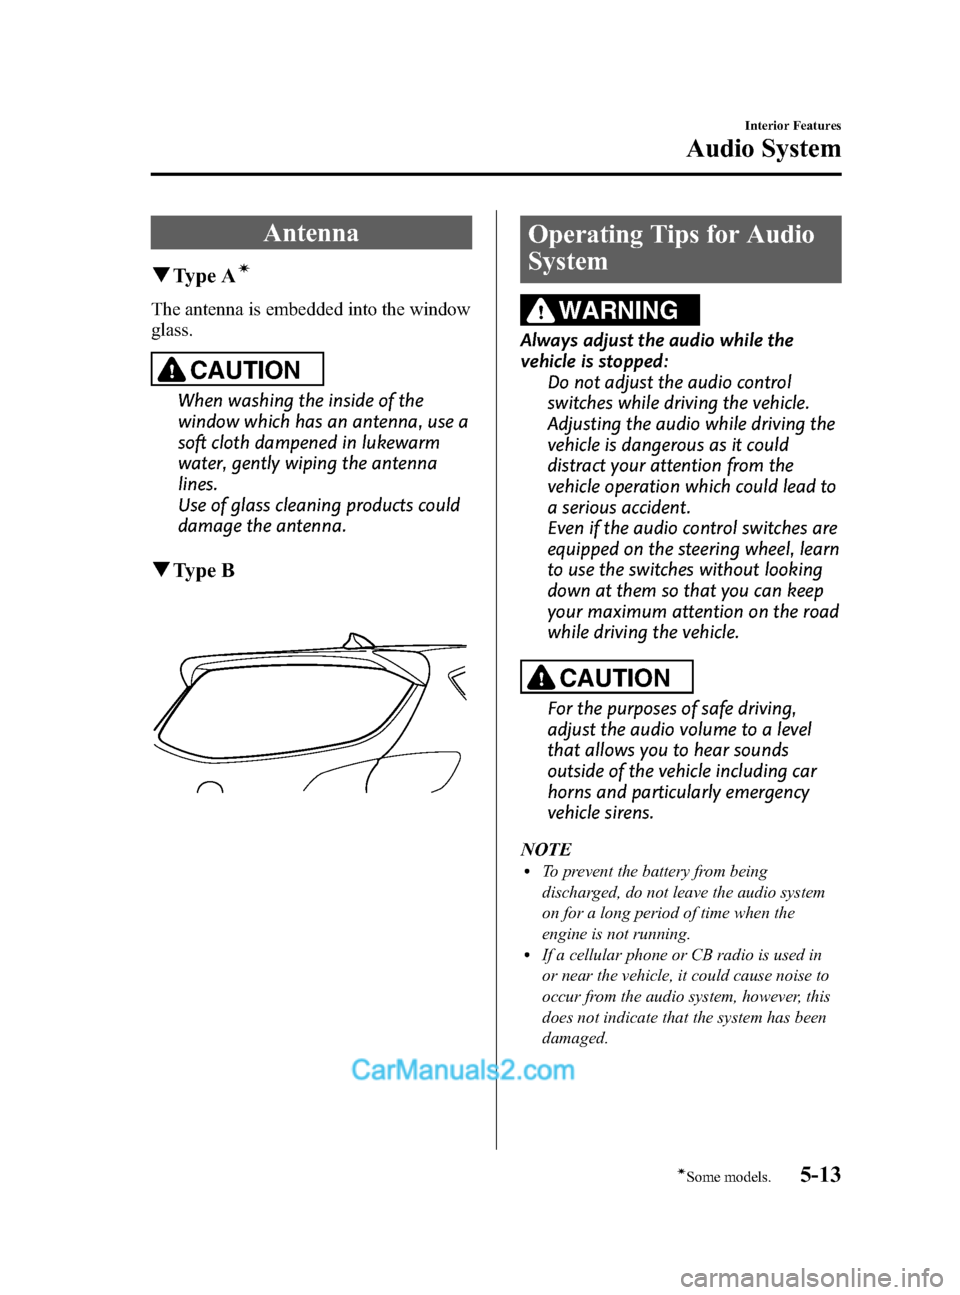 MAZDA MODEL CX-5 2015  Owners Manual (in English) Black plate (253,1)
Antenna
qType Aí
The antenna is embedded into the window
glass.
CAUTION
When washing the inside of the
window which has an antenna, use a
soft cloth dampened in lukewarm
water, ge